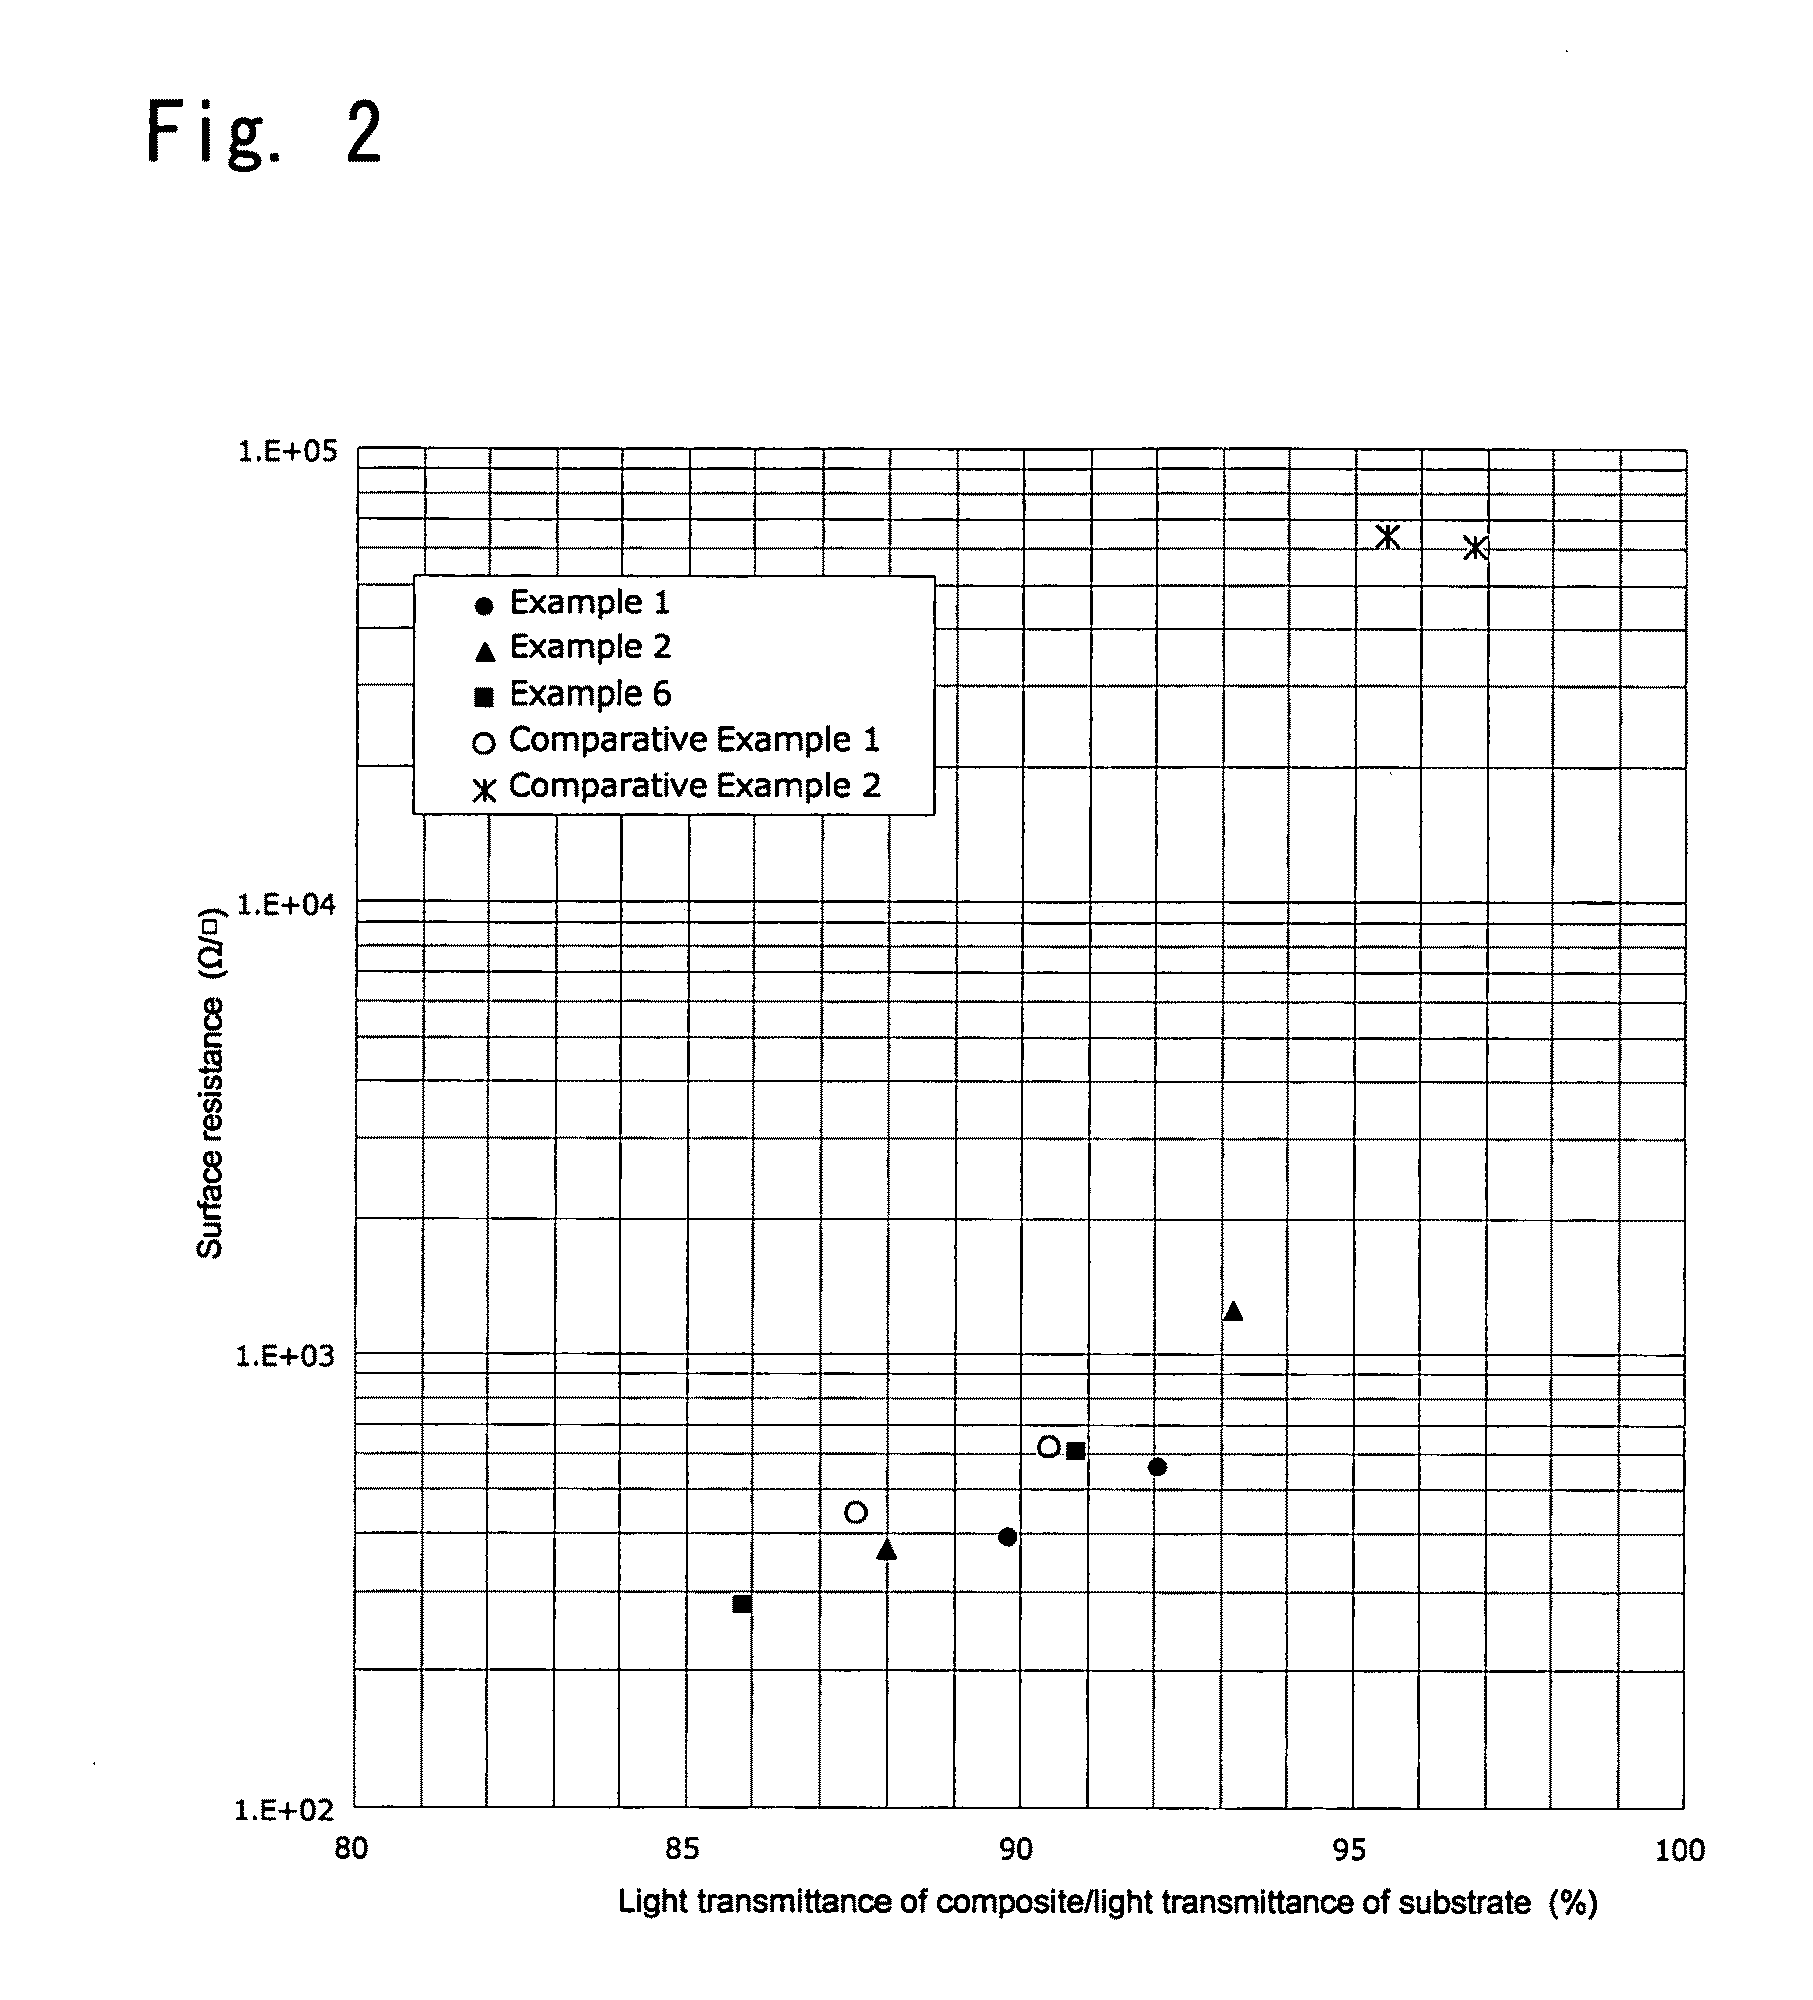 Carbon nanotube assembly and process for producing the same